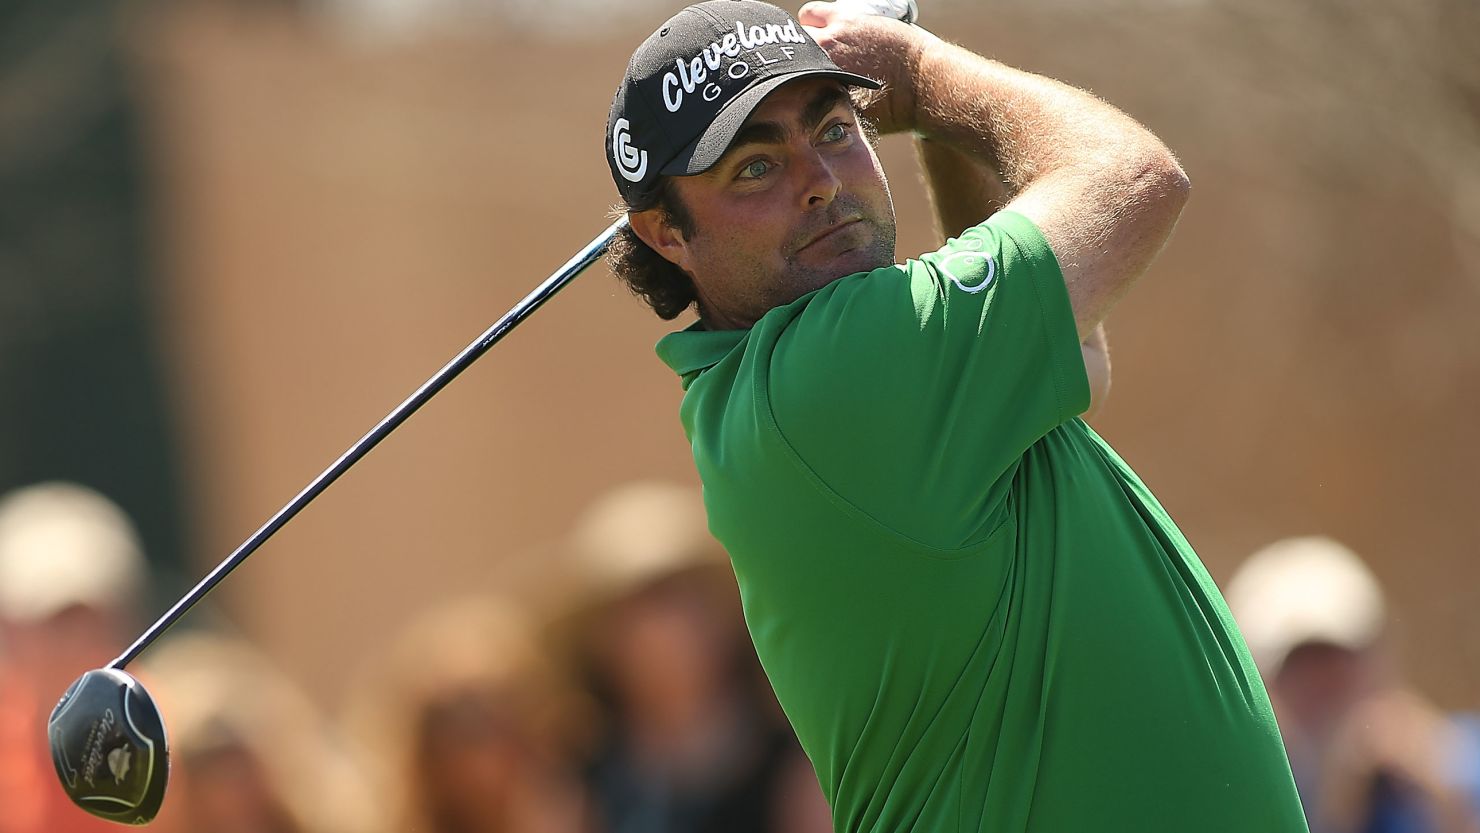 Australian golfer Steven Bowditch attempted to take his own life back in 2006.